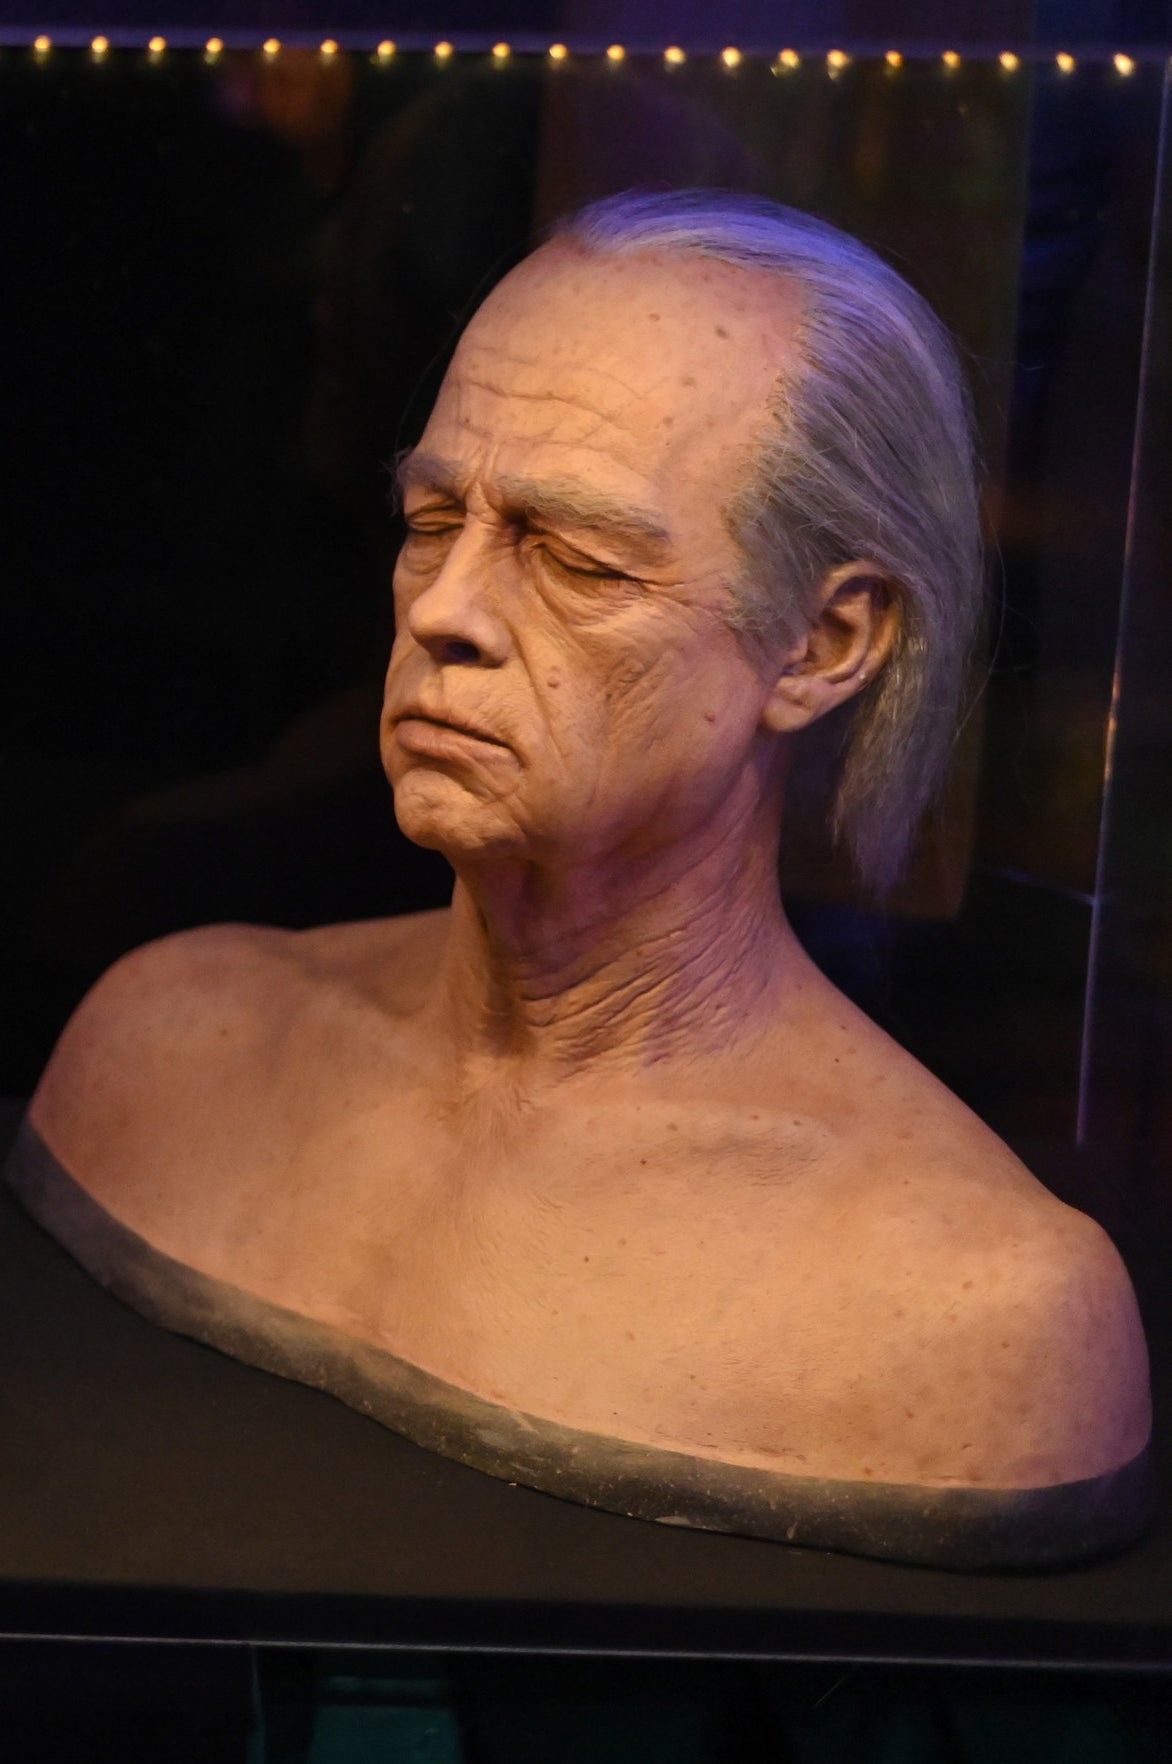 An old prosthetic bust of Brad Pitt in the movie The Curious Case of Benjamin Button